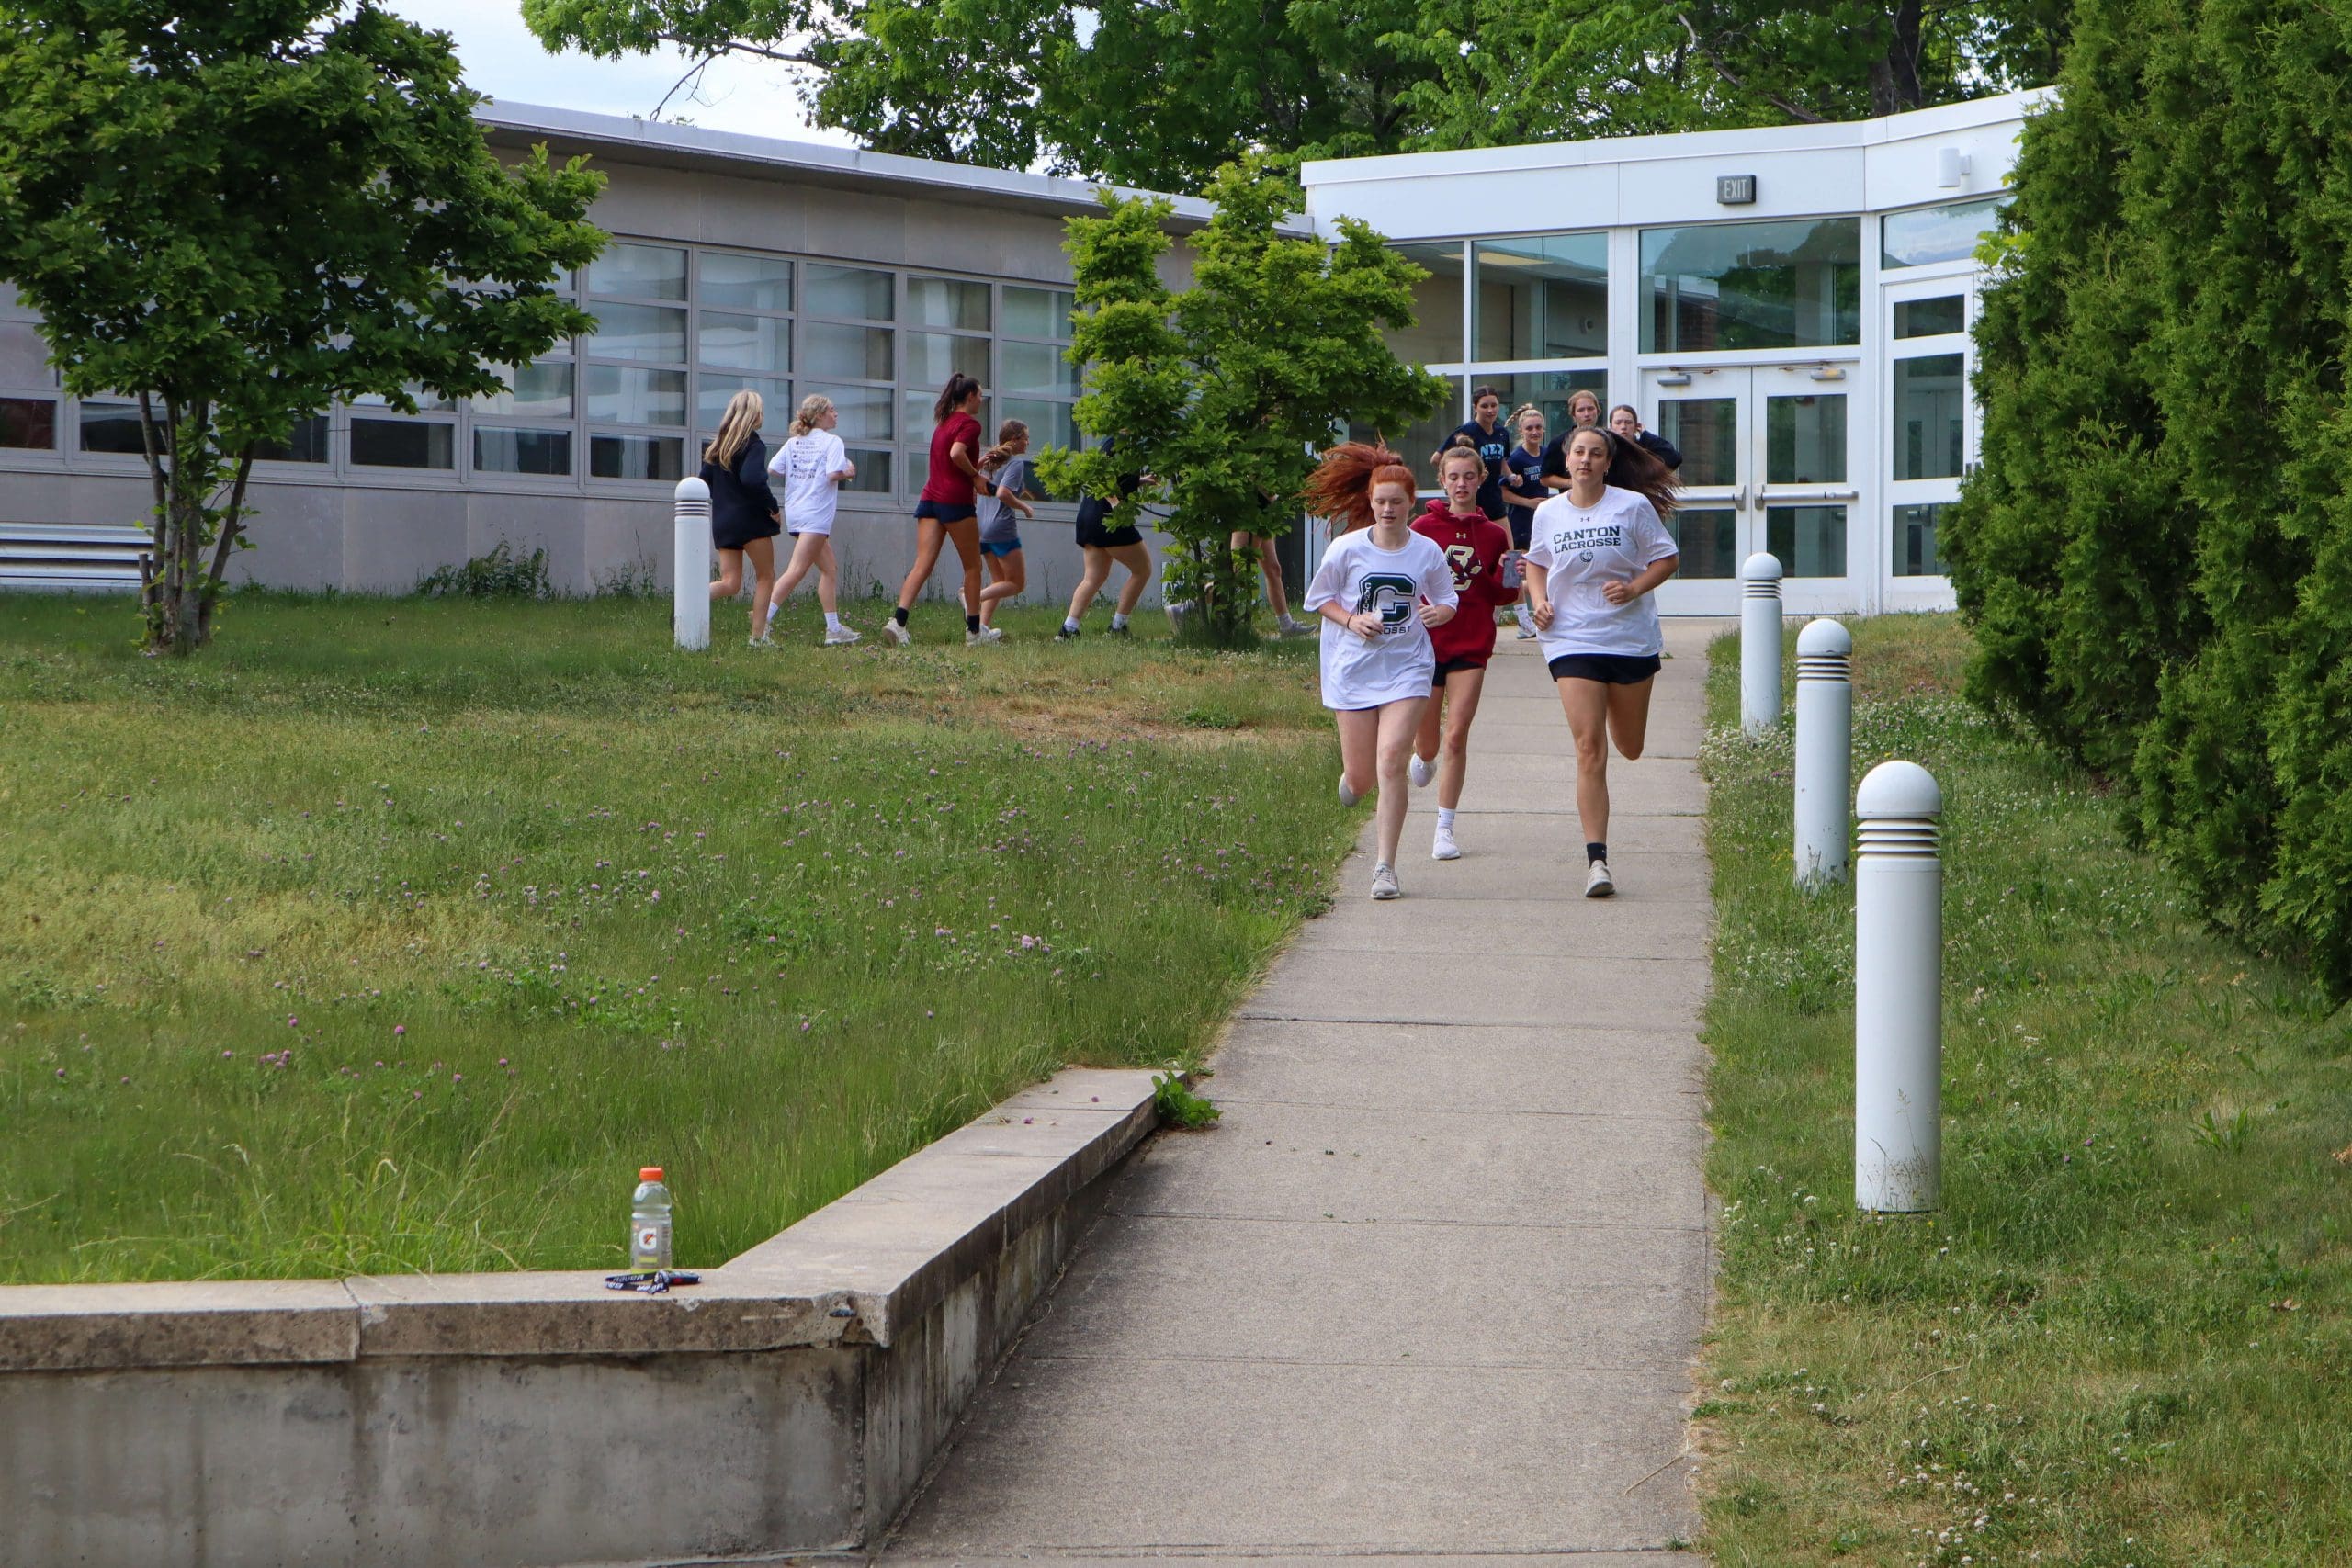 Students jog as part of a warm up for a high school workout.